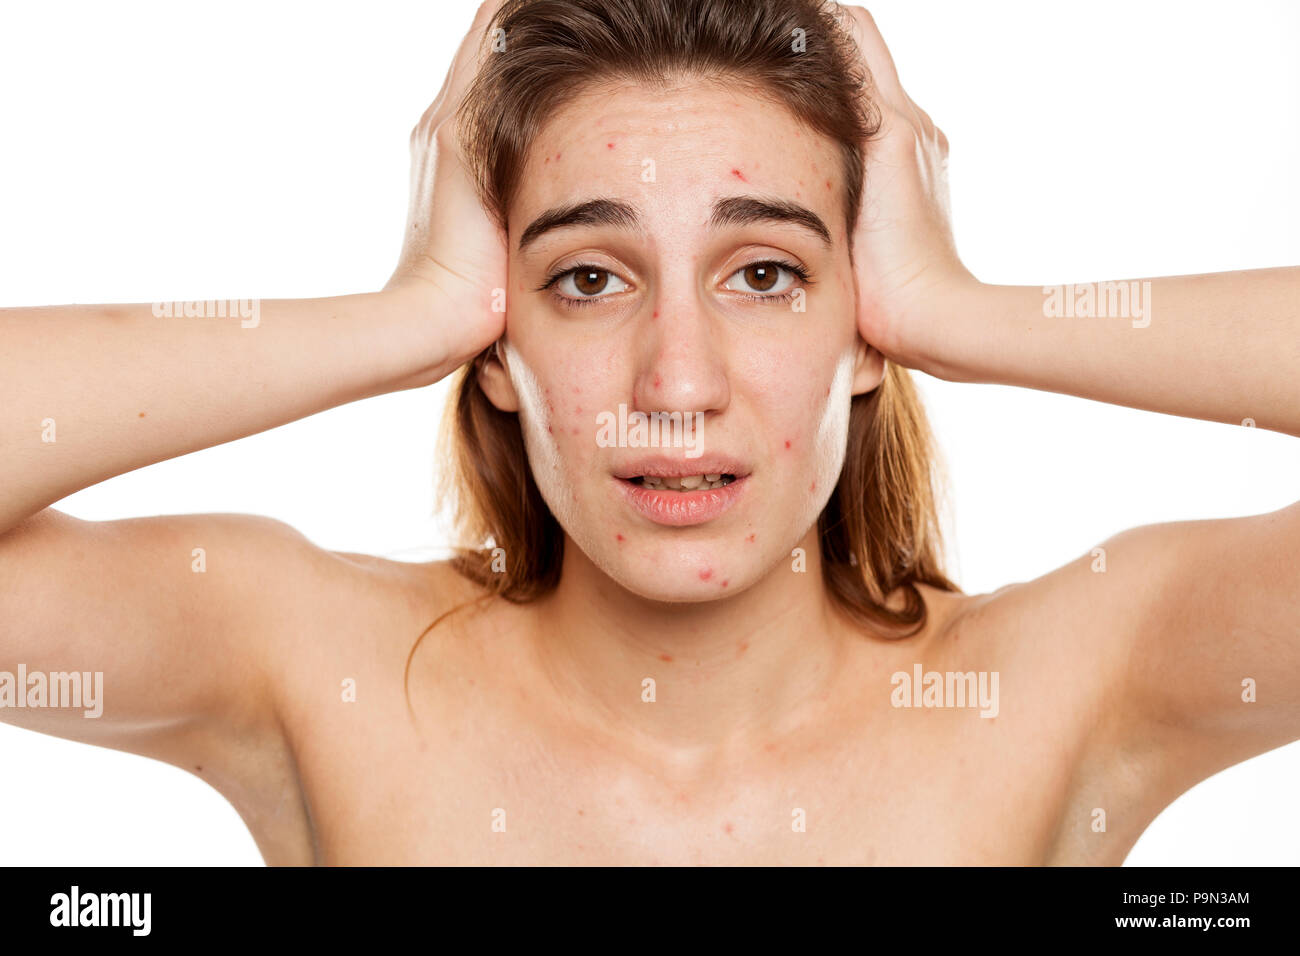 young unhappy woman with problematic skin and without makeup squeeze her acne on a white background Stock Photo